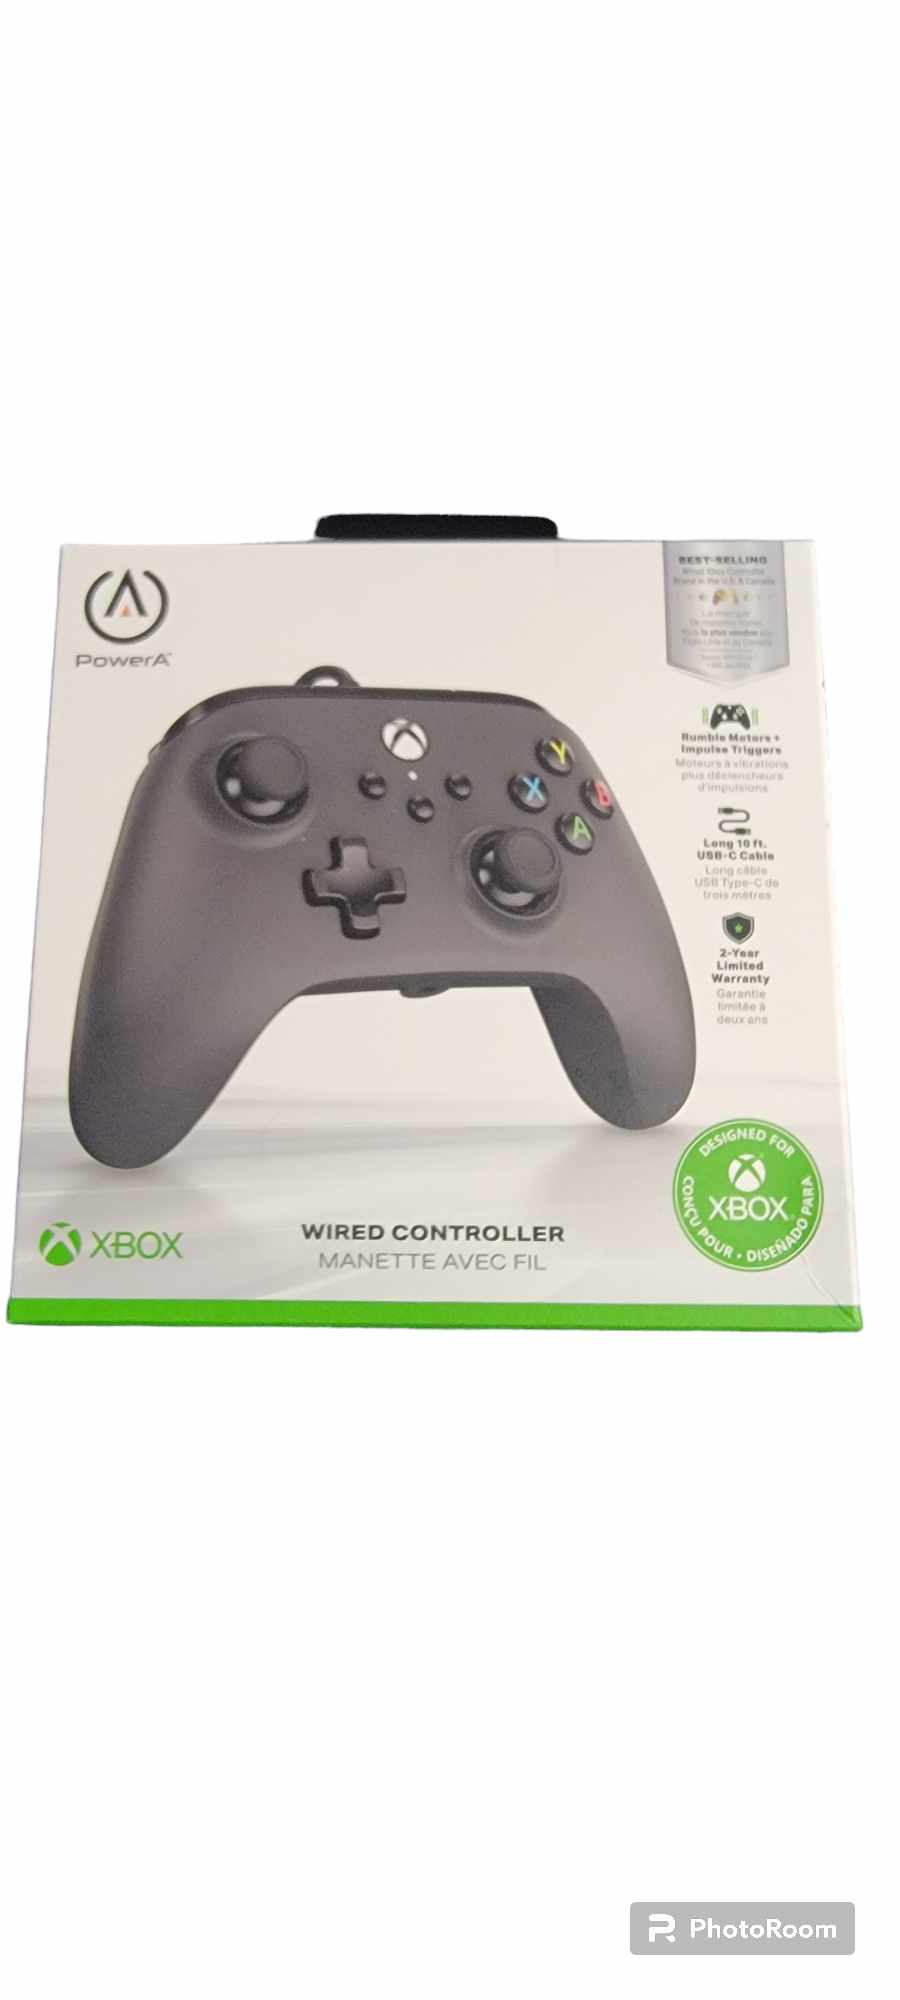 Power A Xbox Wired Controller Black